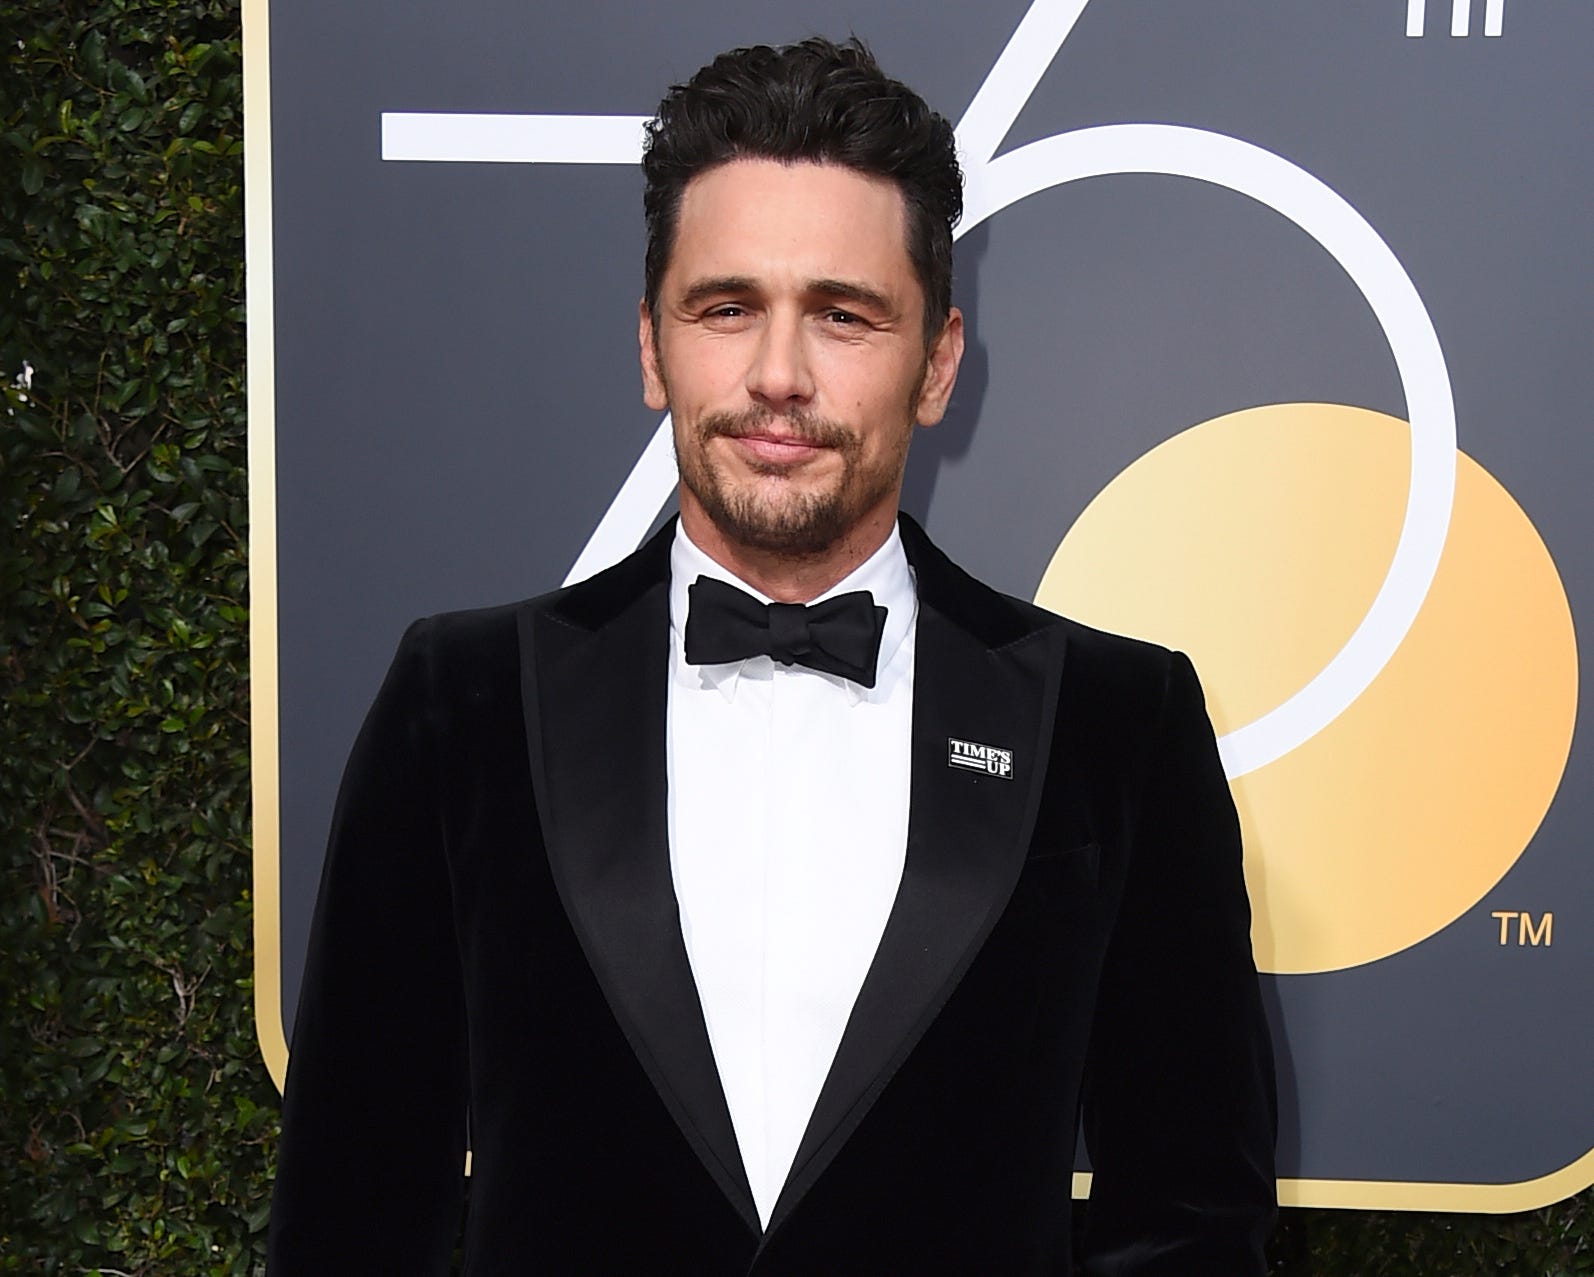 7485f55b-f62d-480d-91ad-3d669bc6c1b2-AP_James_Franco James Franco to play Fidel Castro in 'Alina of Cuba' following sexual misconduct lawsuit